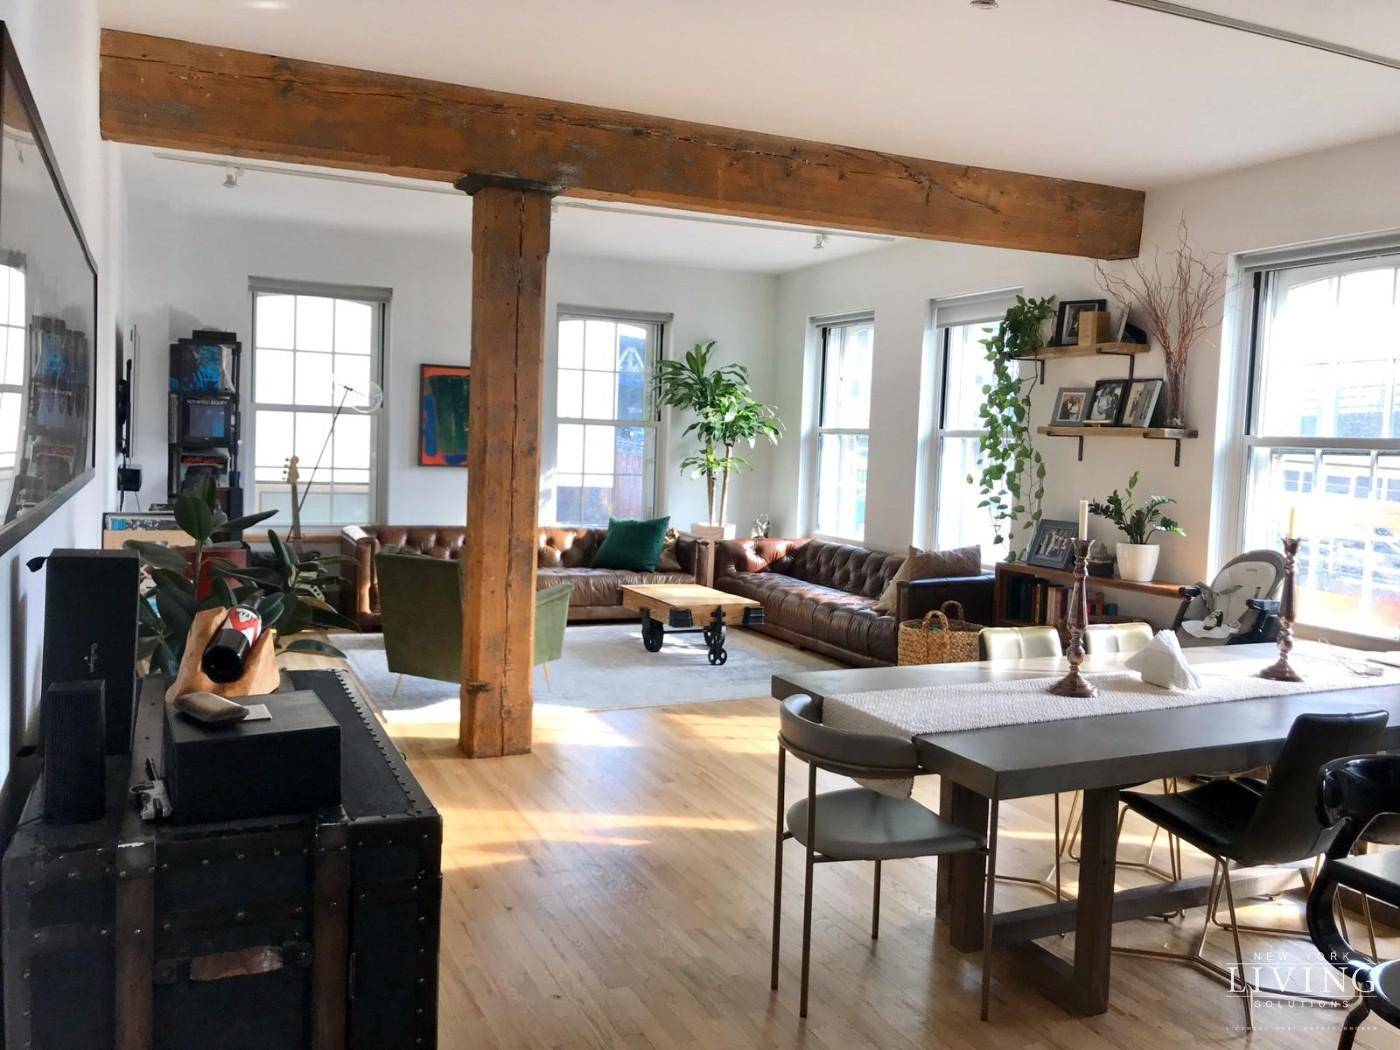 Tremendous corner 2 bed plus home office loft unit, boasting over 1700 sq ft, featuring 11 large windows, flooded with sunlight facing South East exposure.